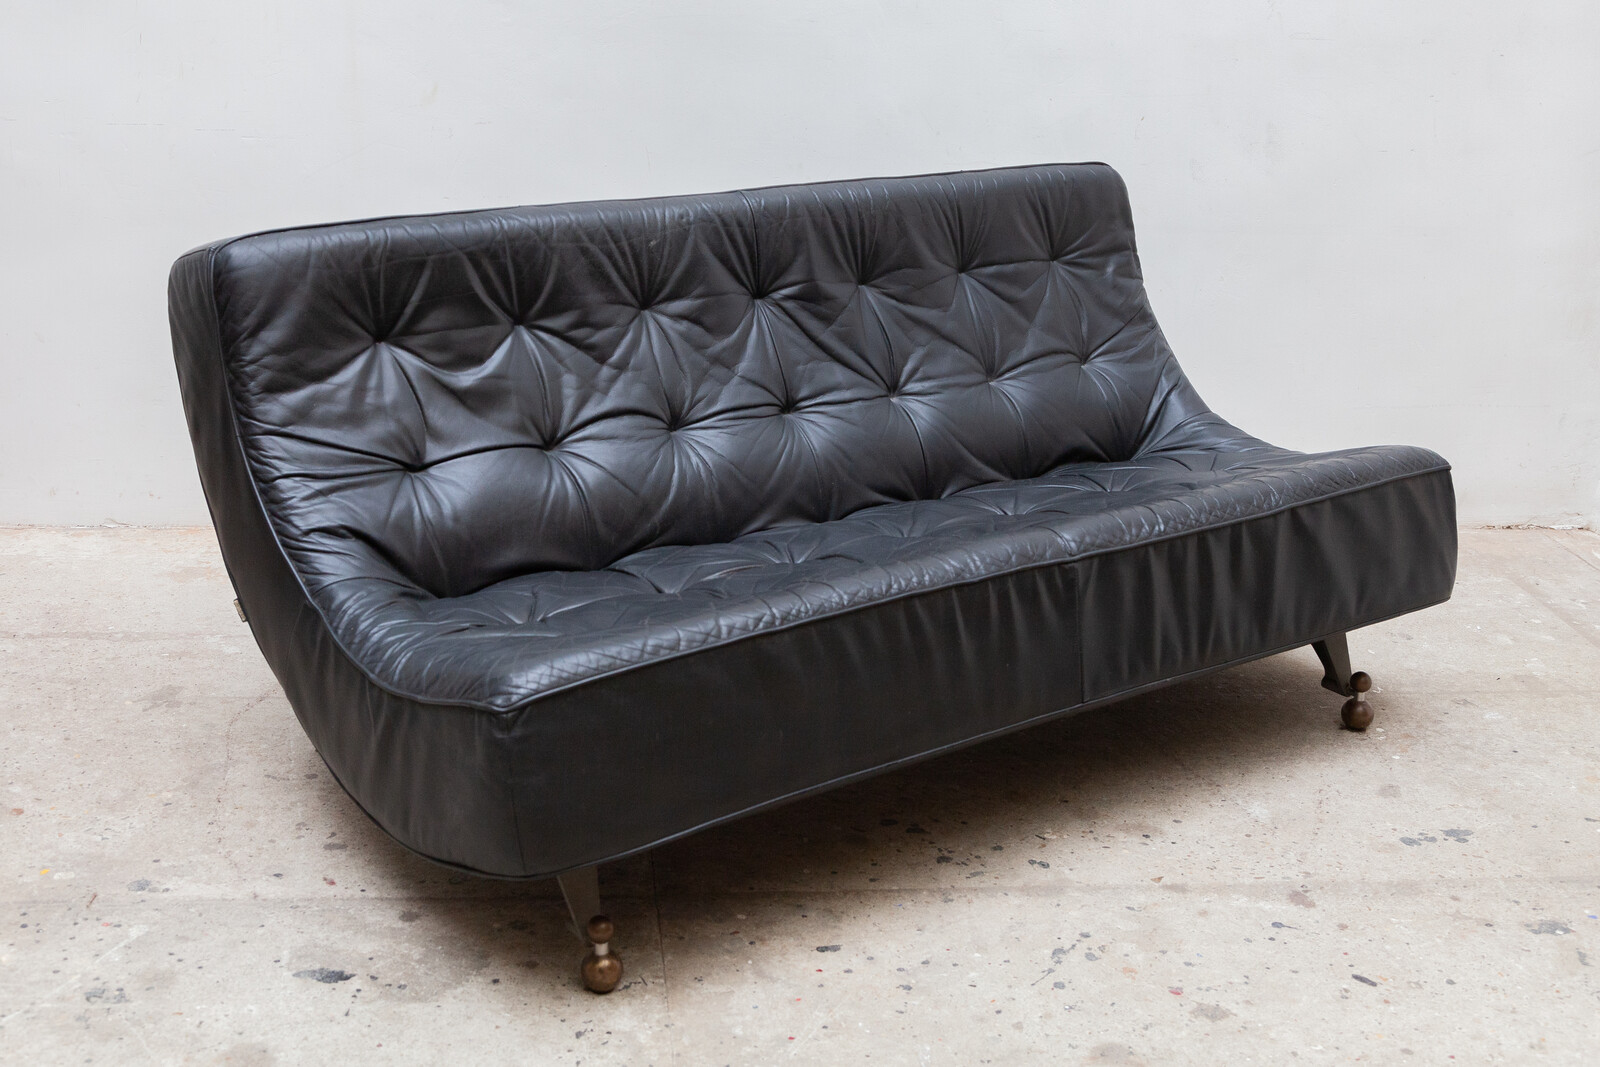 Leather Items by Montis 1980s, Gerard - Akanthos - - Tufted van Berg Netherlands European DECORATIVE den & Recent Interiors Sofa Black Eclectic ANTIQUES Added